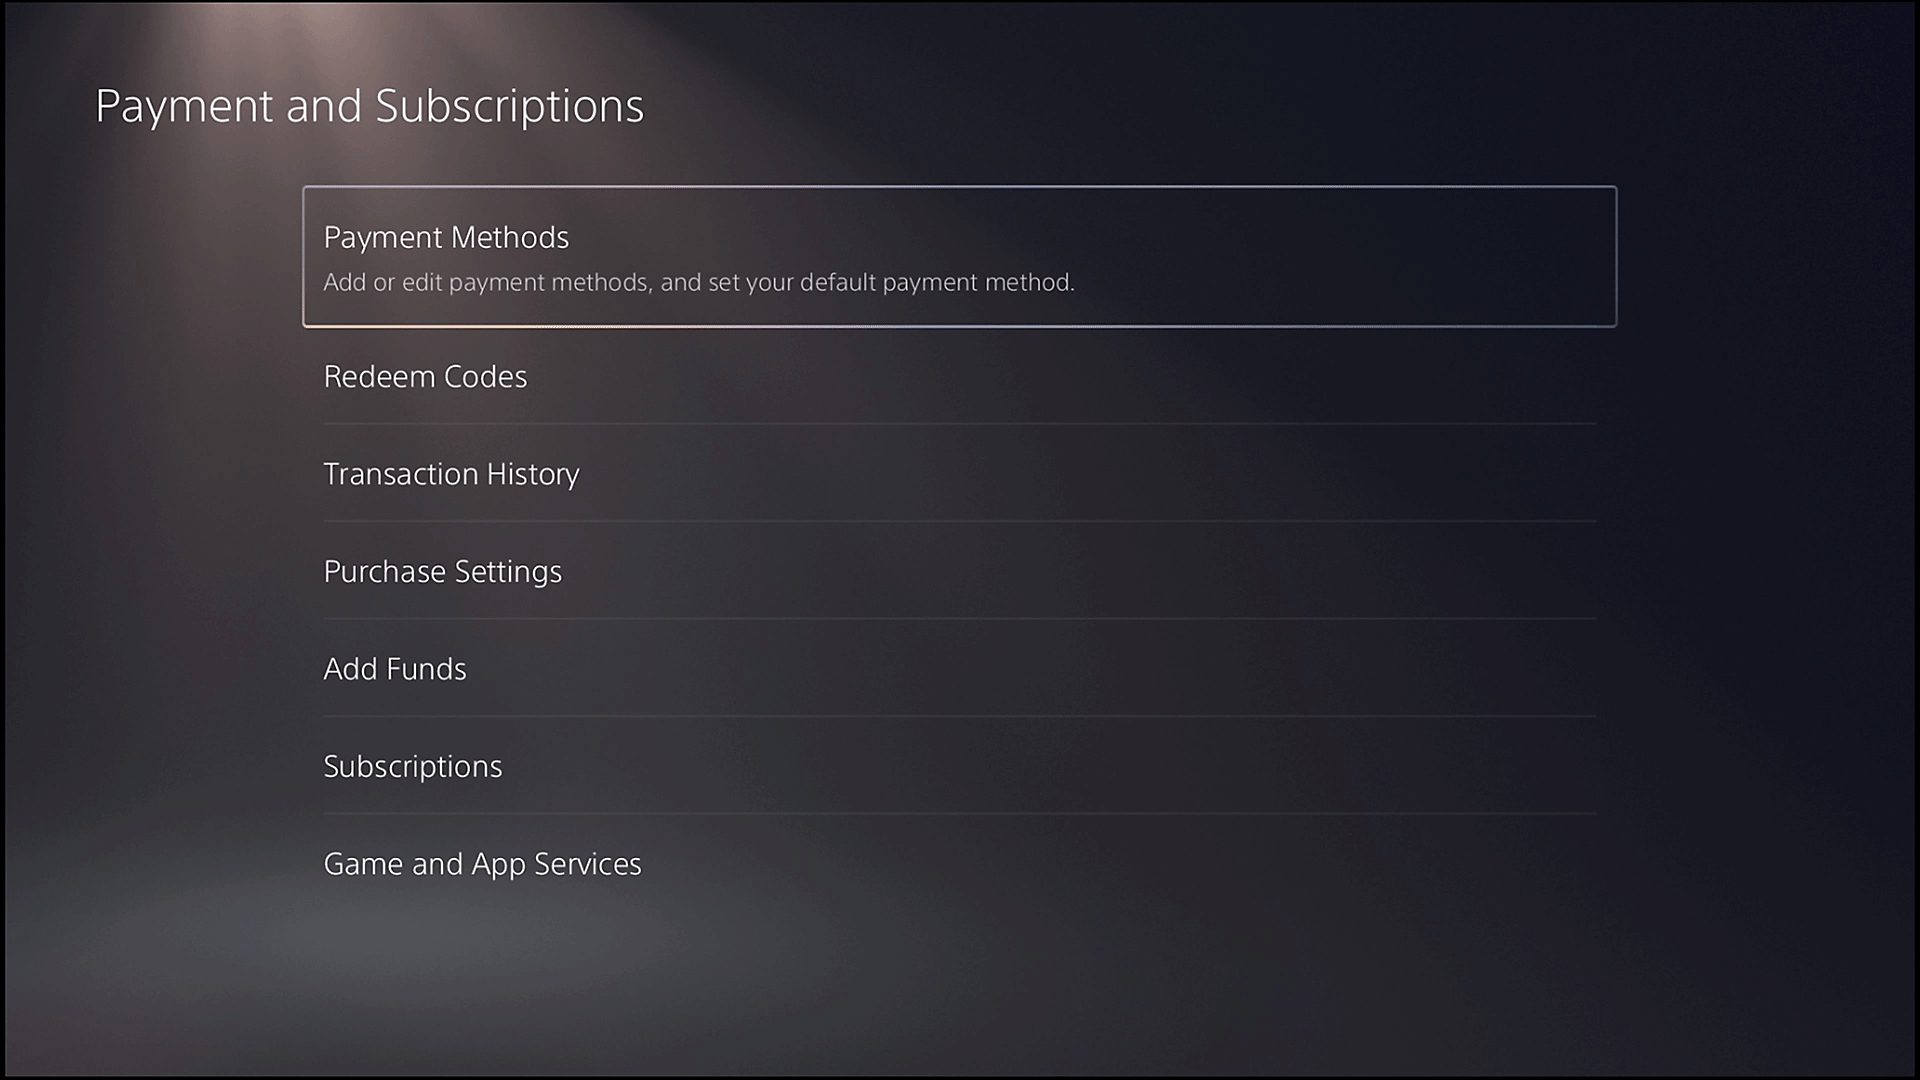 PS5 Payment and Subscriptions menu with Payment Methods section highlighted